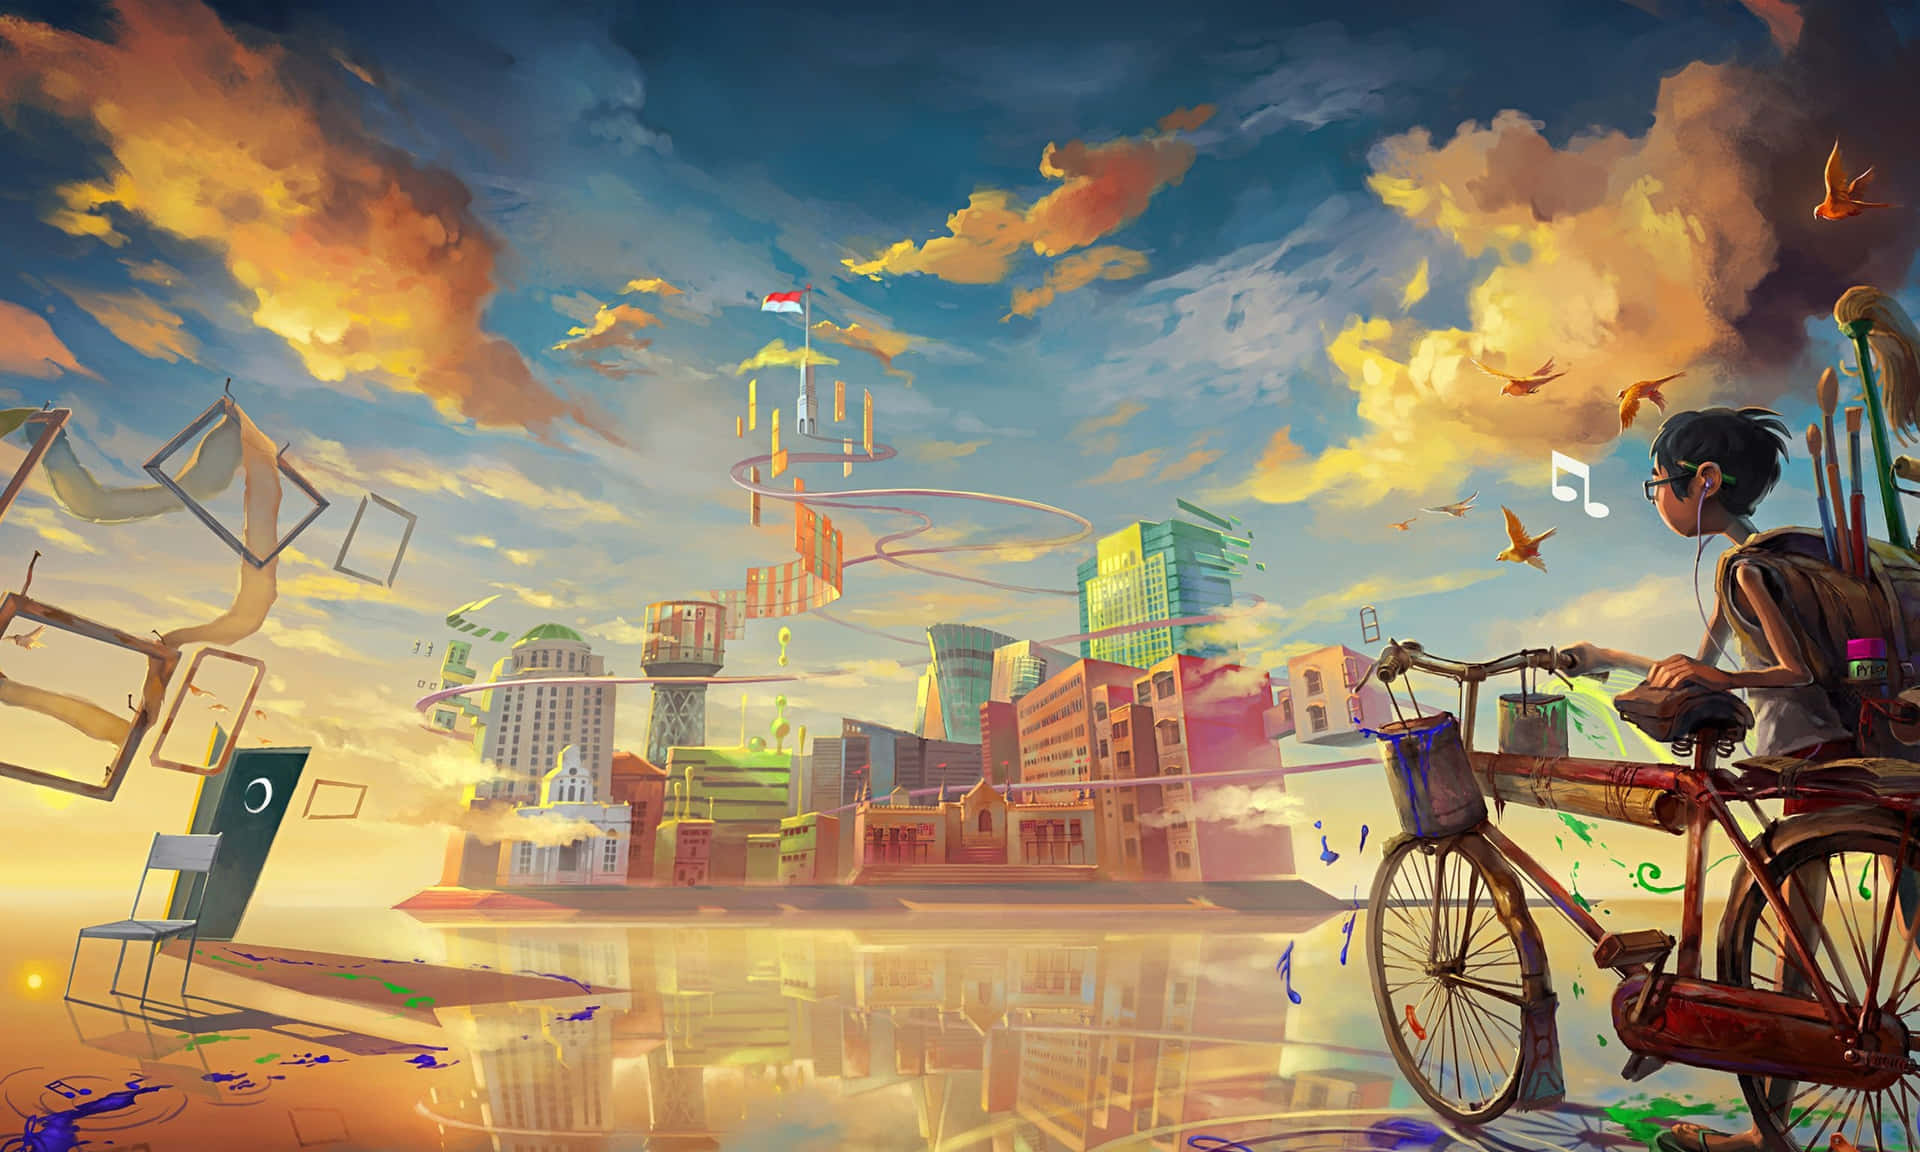 Cool Art Alone Boy In A Fantasy City Background